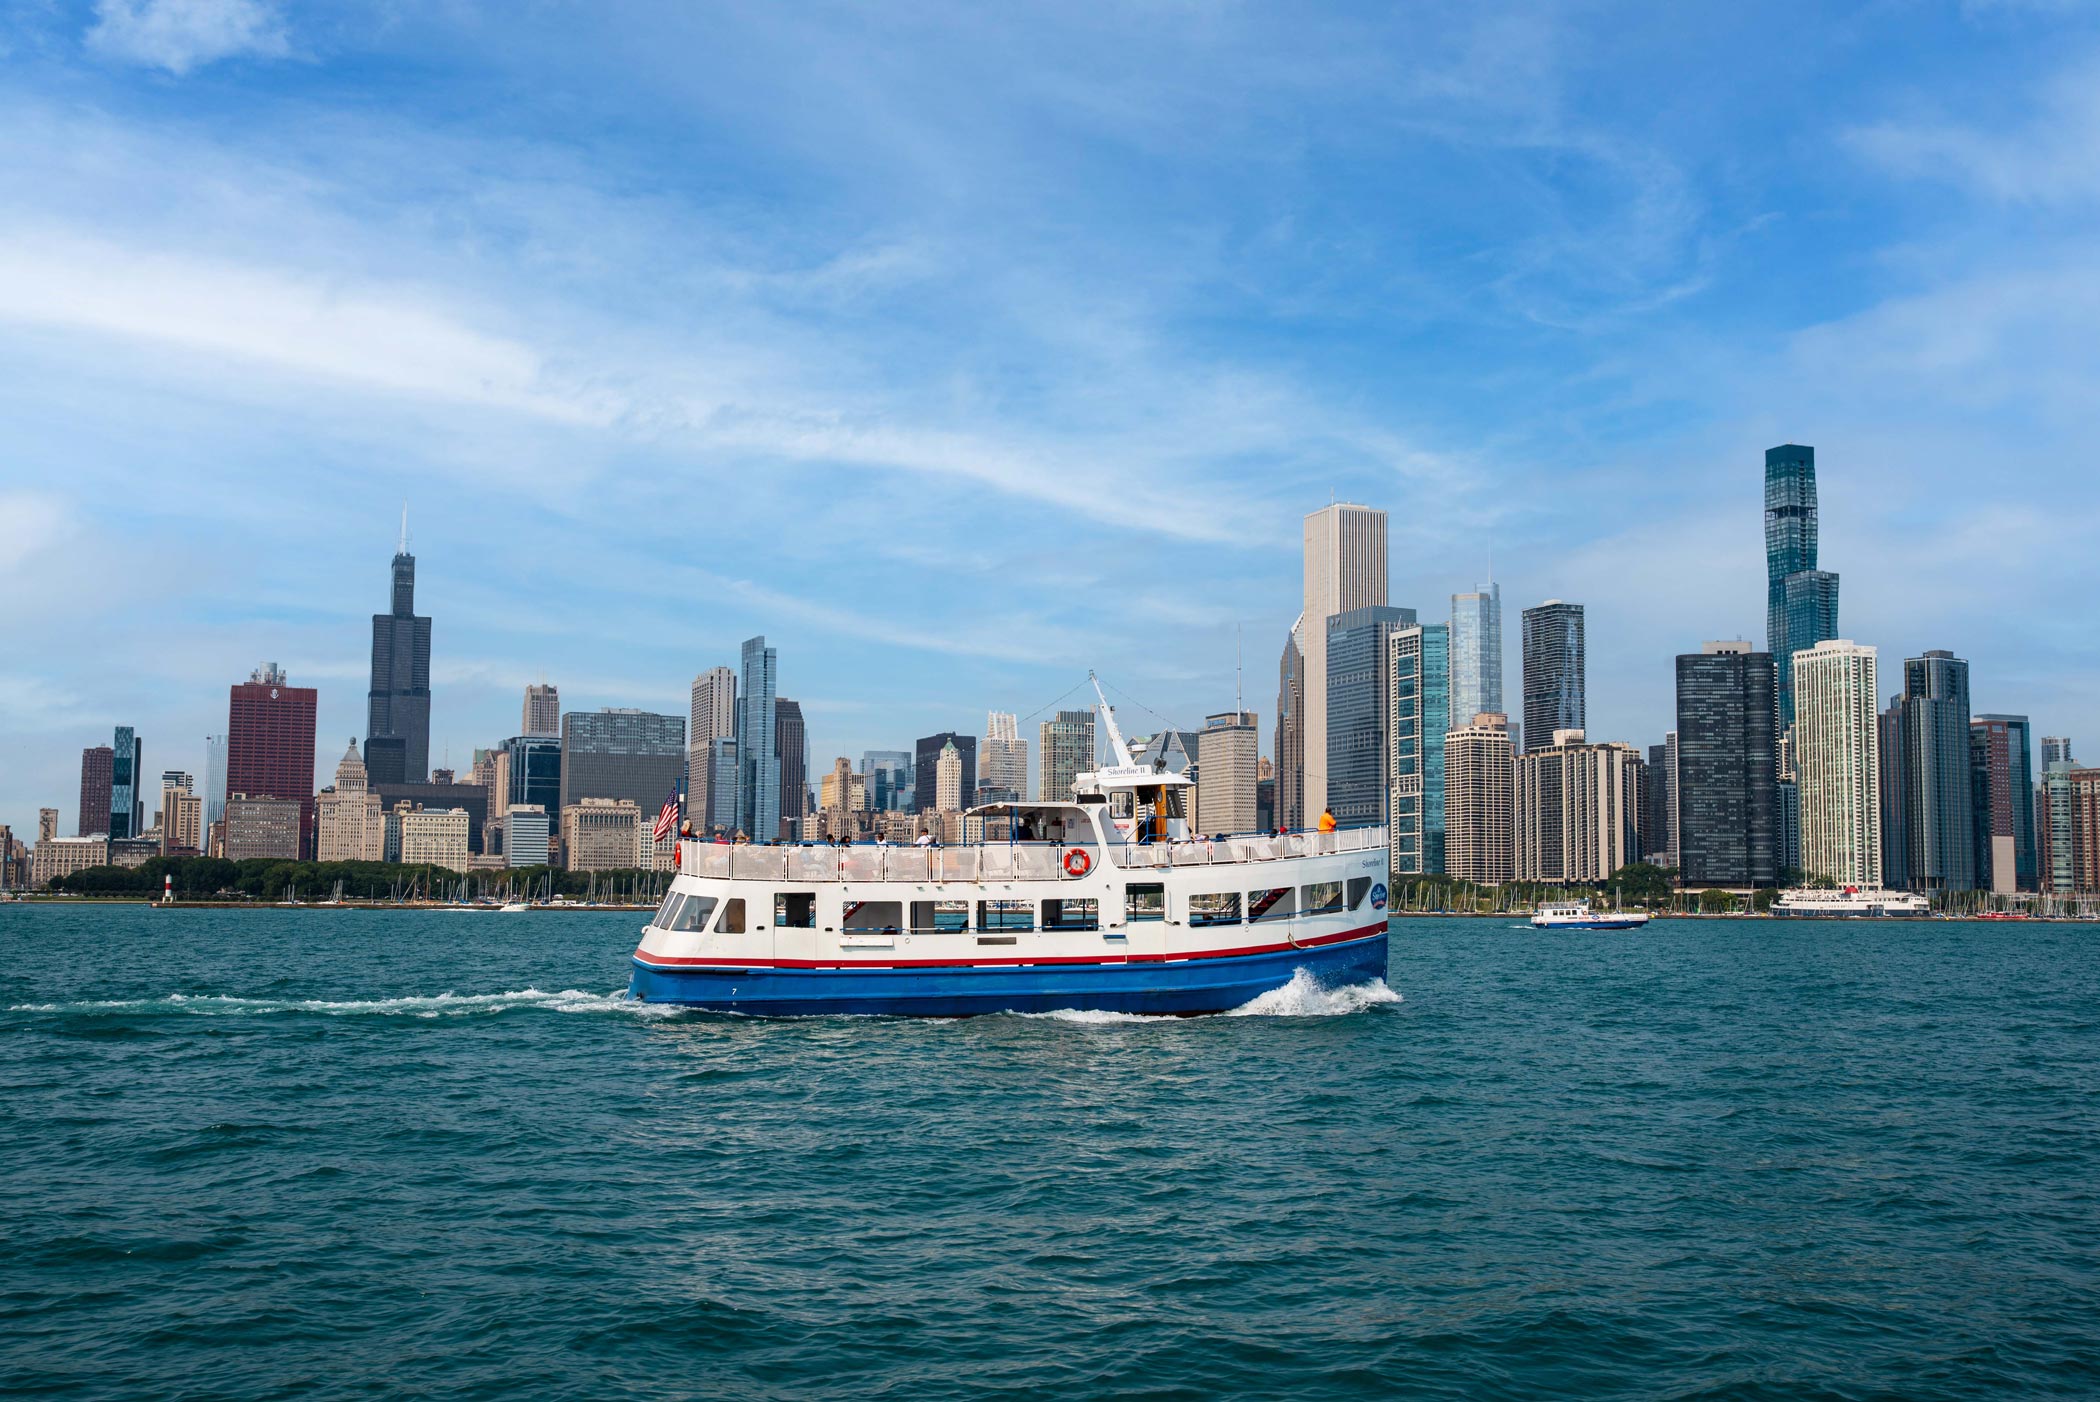 Shoreline Sightseeing Tour with Chicago Skyline